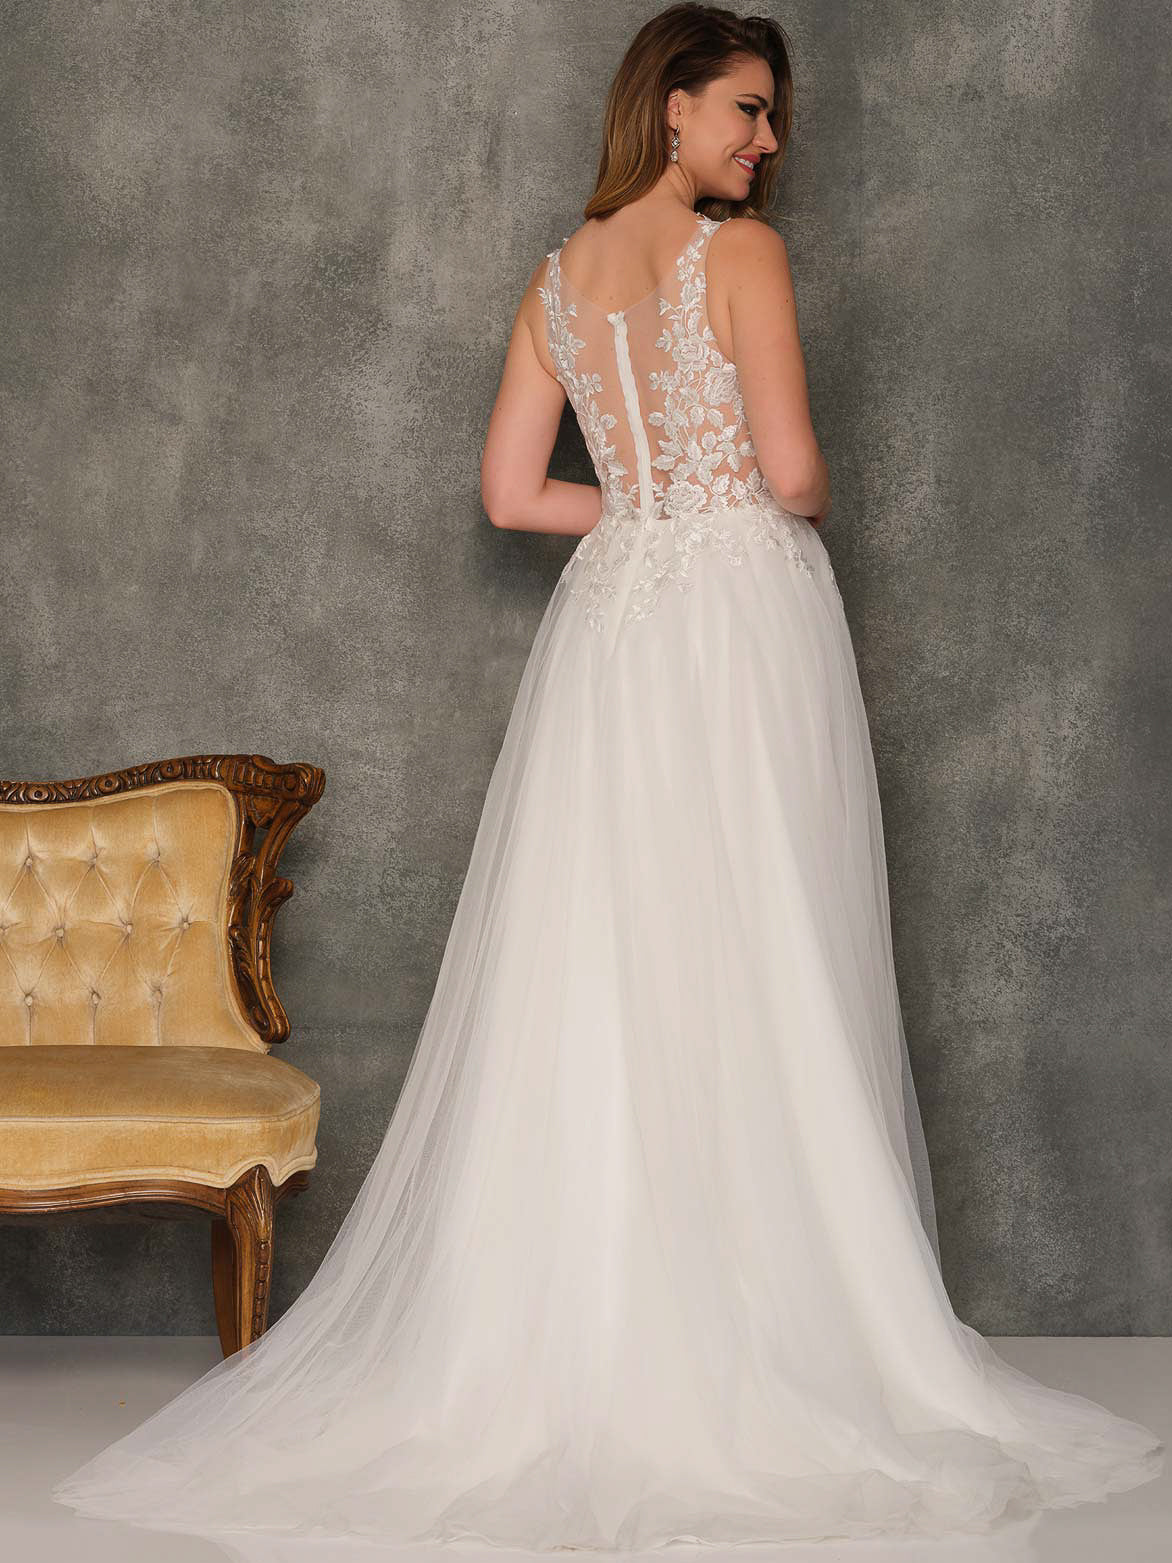 ROSE EMBROIDERED TRANSPARENT BACK A-LINE WEDDING GOWN